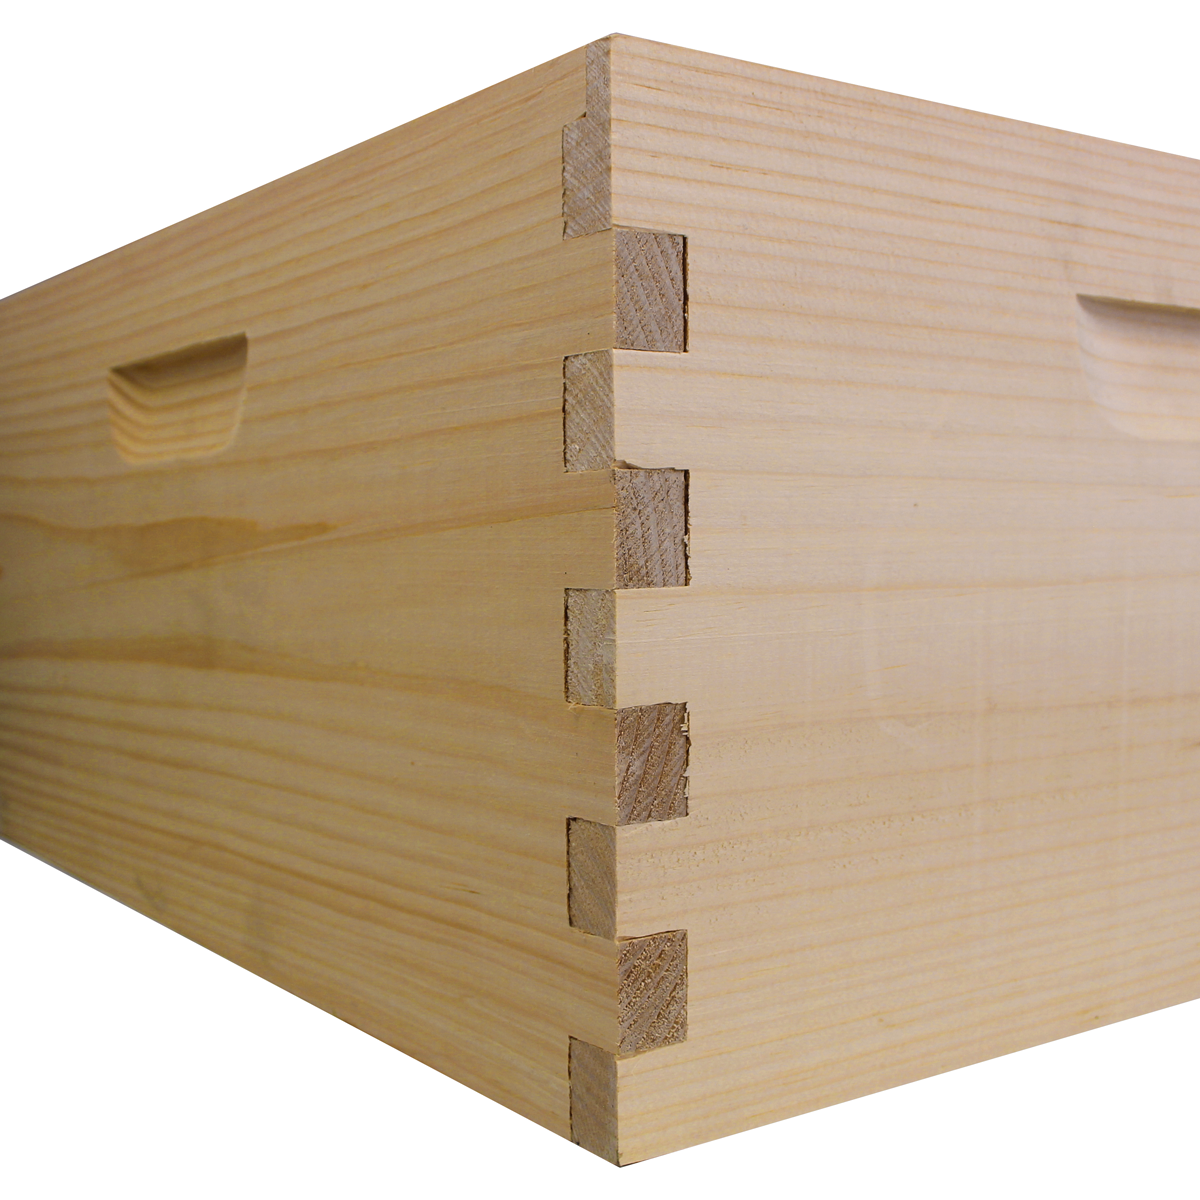 8 Frame Langstroth Amish-Made Deep Brood Box (Box Only, No Frames)